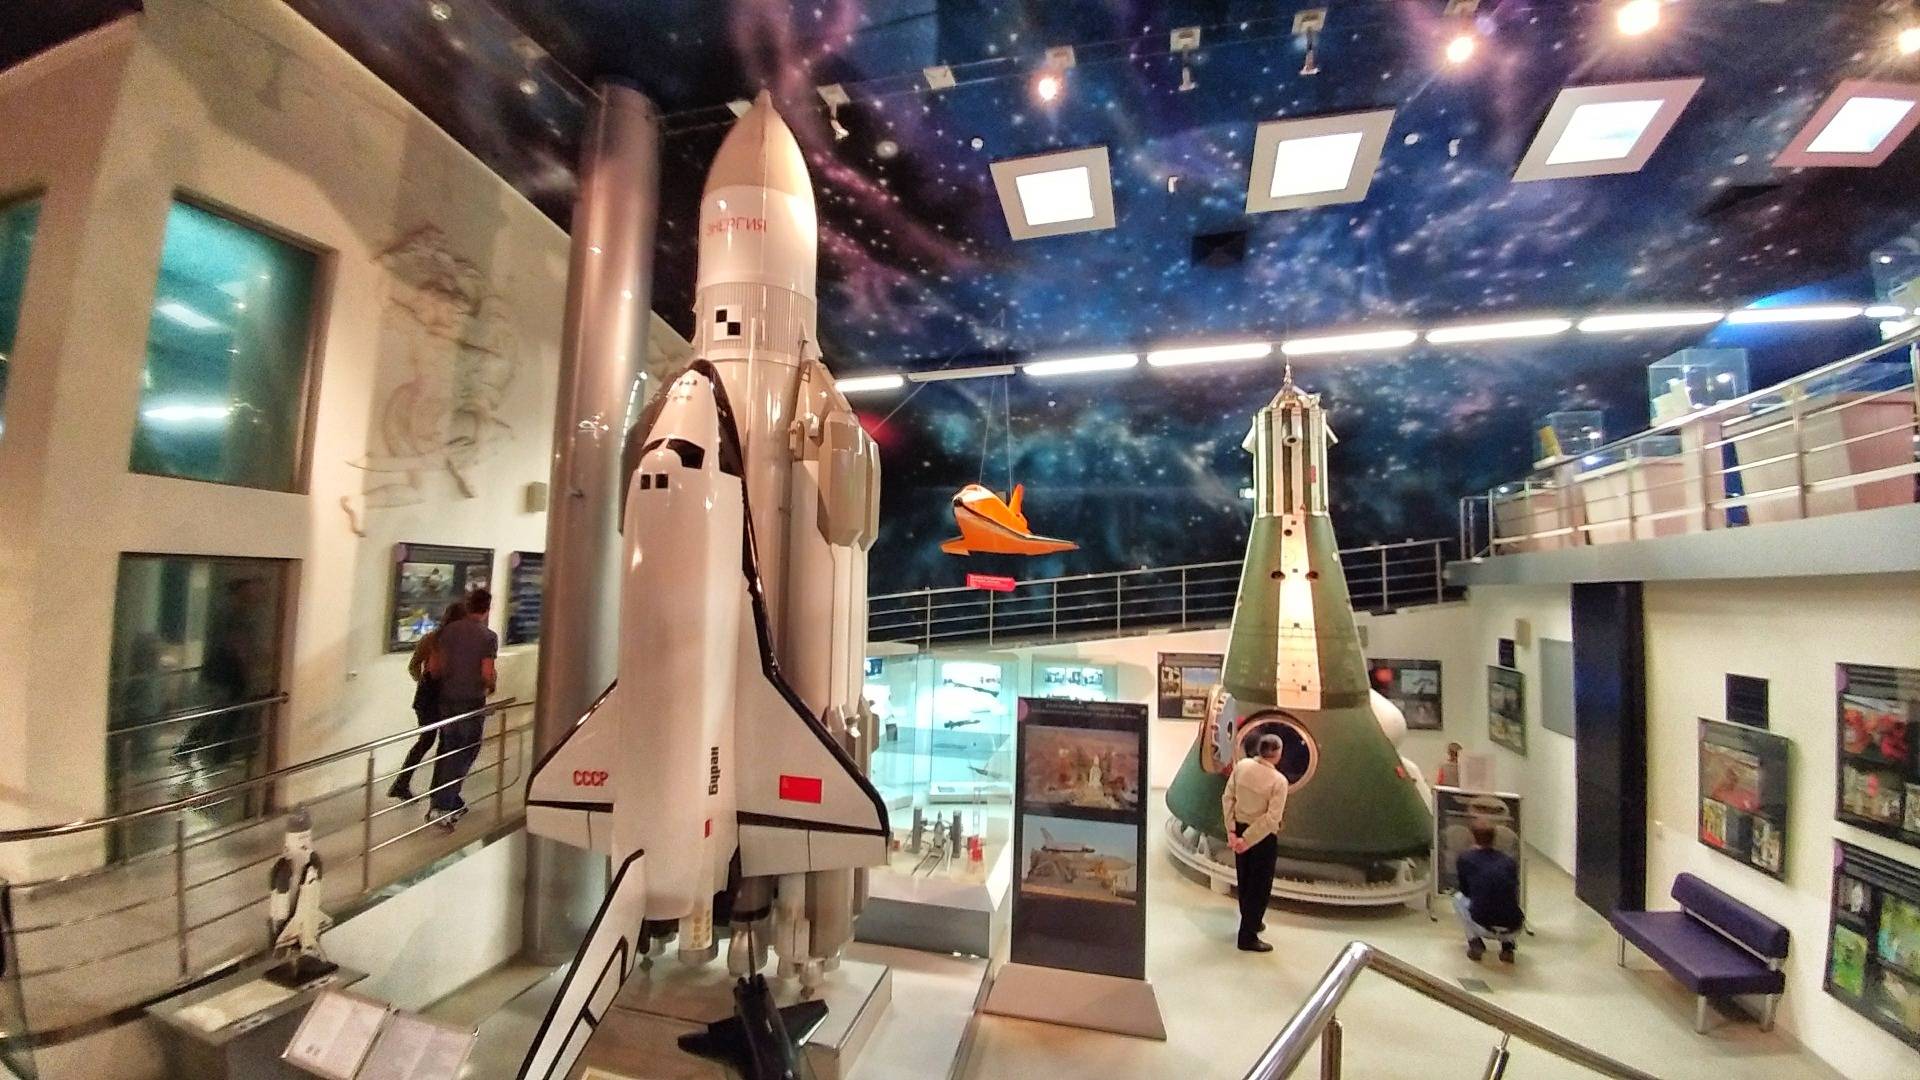 The ”Buran” (left side) once was the soviet space shuttle